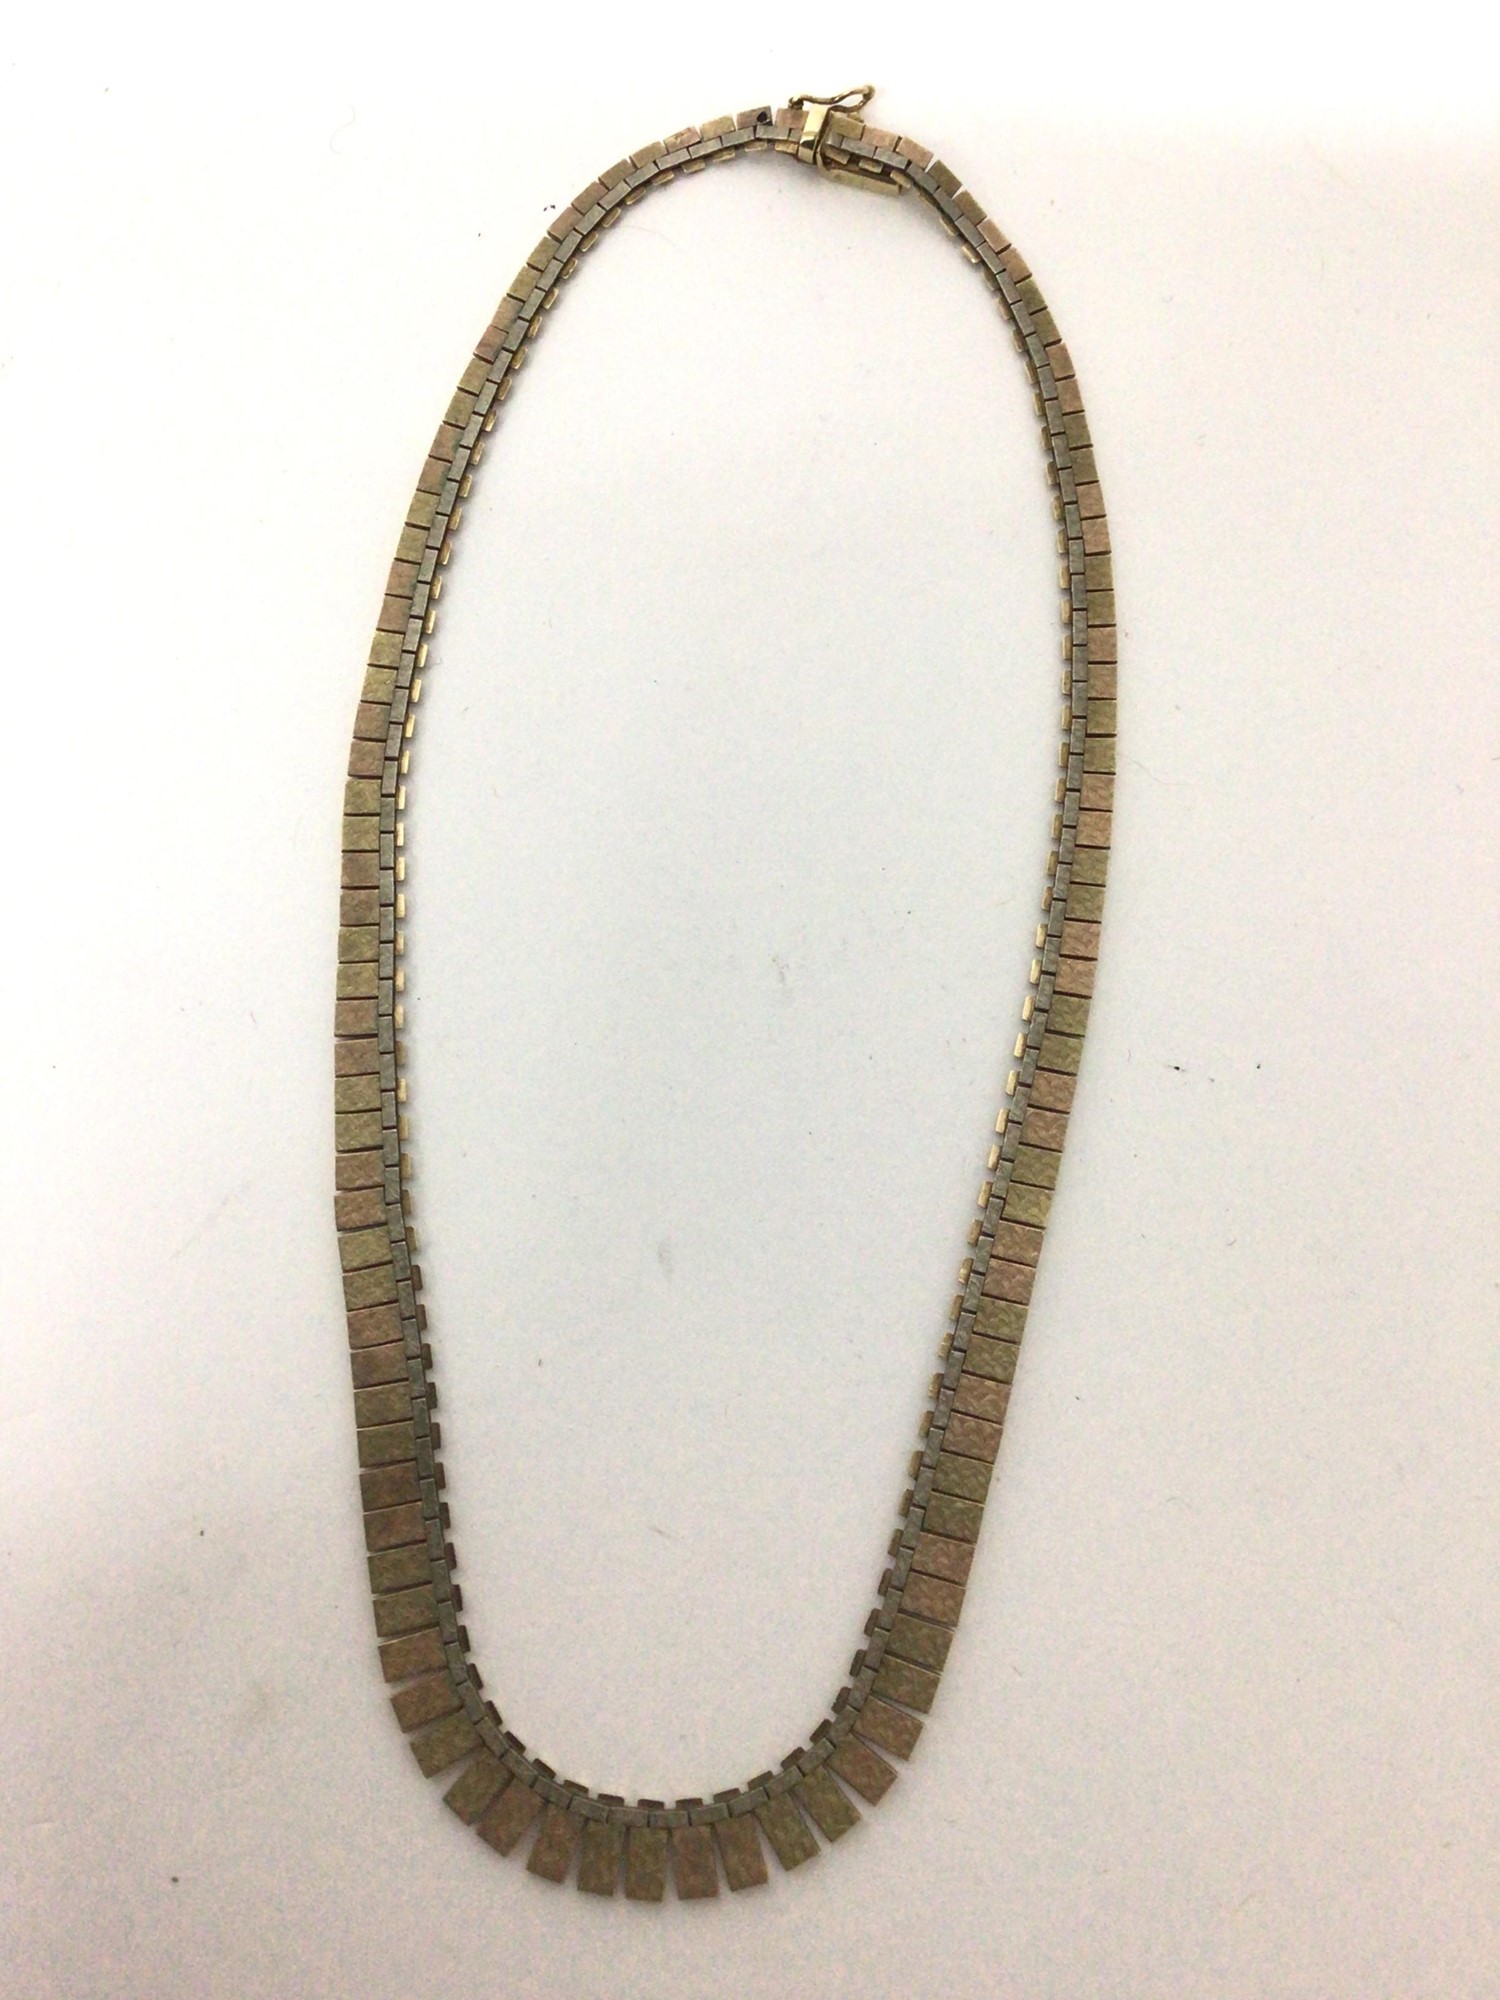 9ct yellow gold Cleopatra necklace NQ00041 - City of London Jewellers